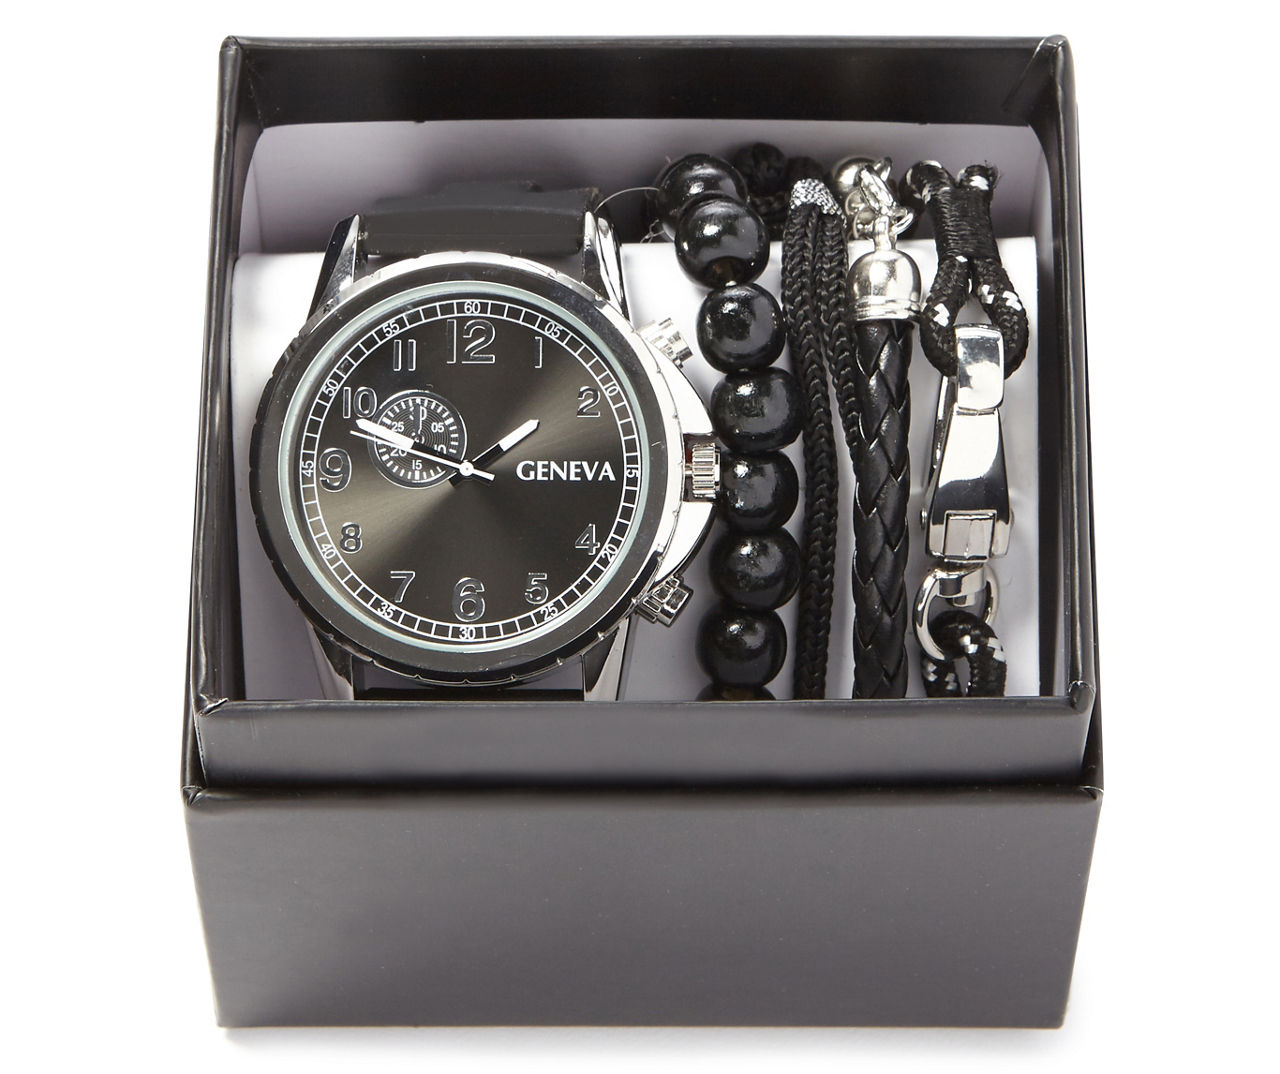 MDV106-1A | Black and Silver Men's Analog Watch | CASIO